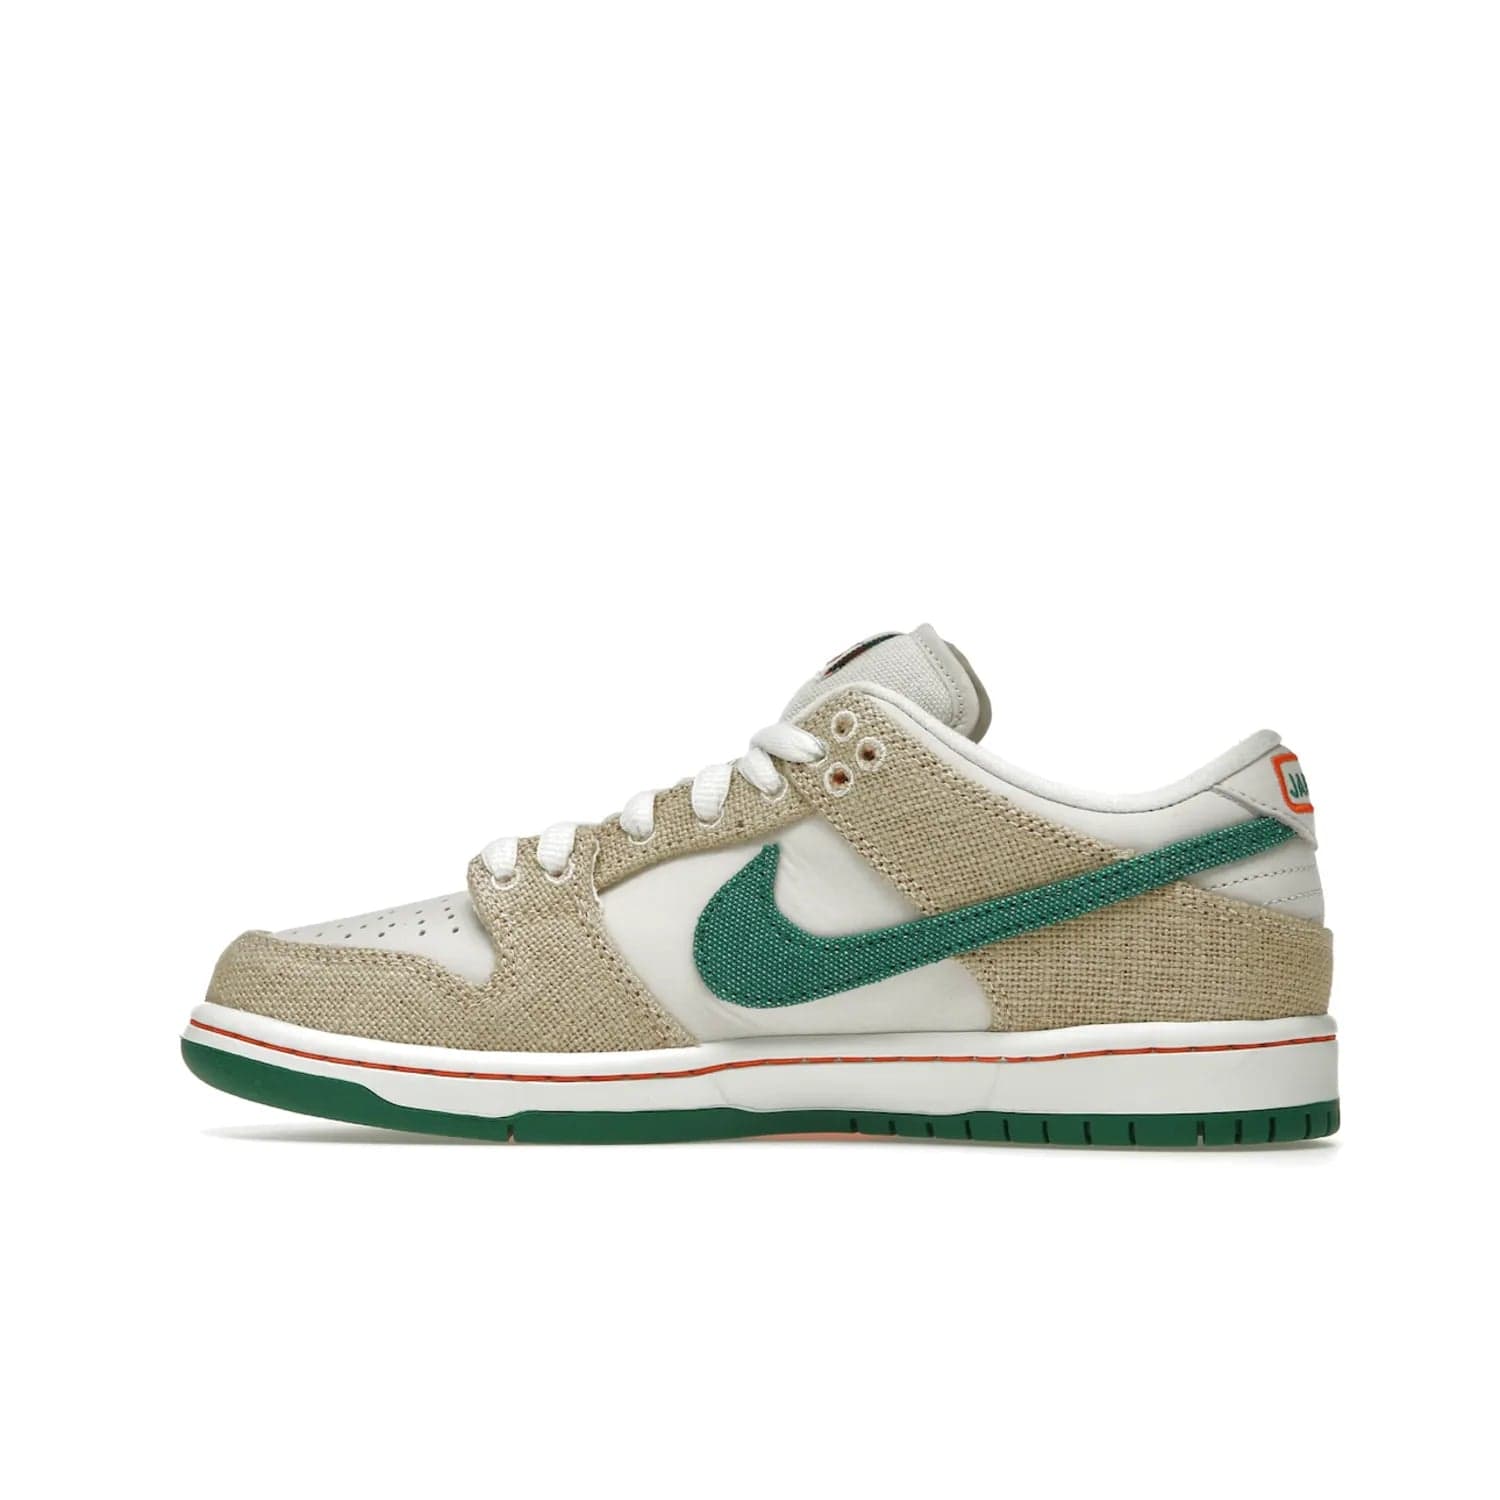 Nike SB Dunk Low Jarritos - Image 20 - Only at www.BallersClubKickz.com - Shop limited edition Nike SB Dunk Low Jarritos! Crafted with white leather and tear-away canvas materials with green accents. Includes orange, green, and white laces to customize your look. Available now.